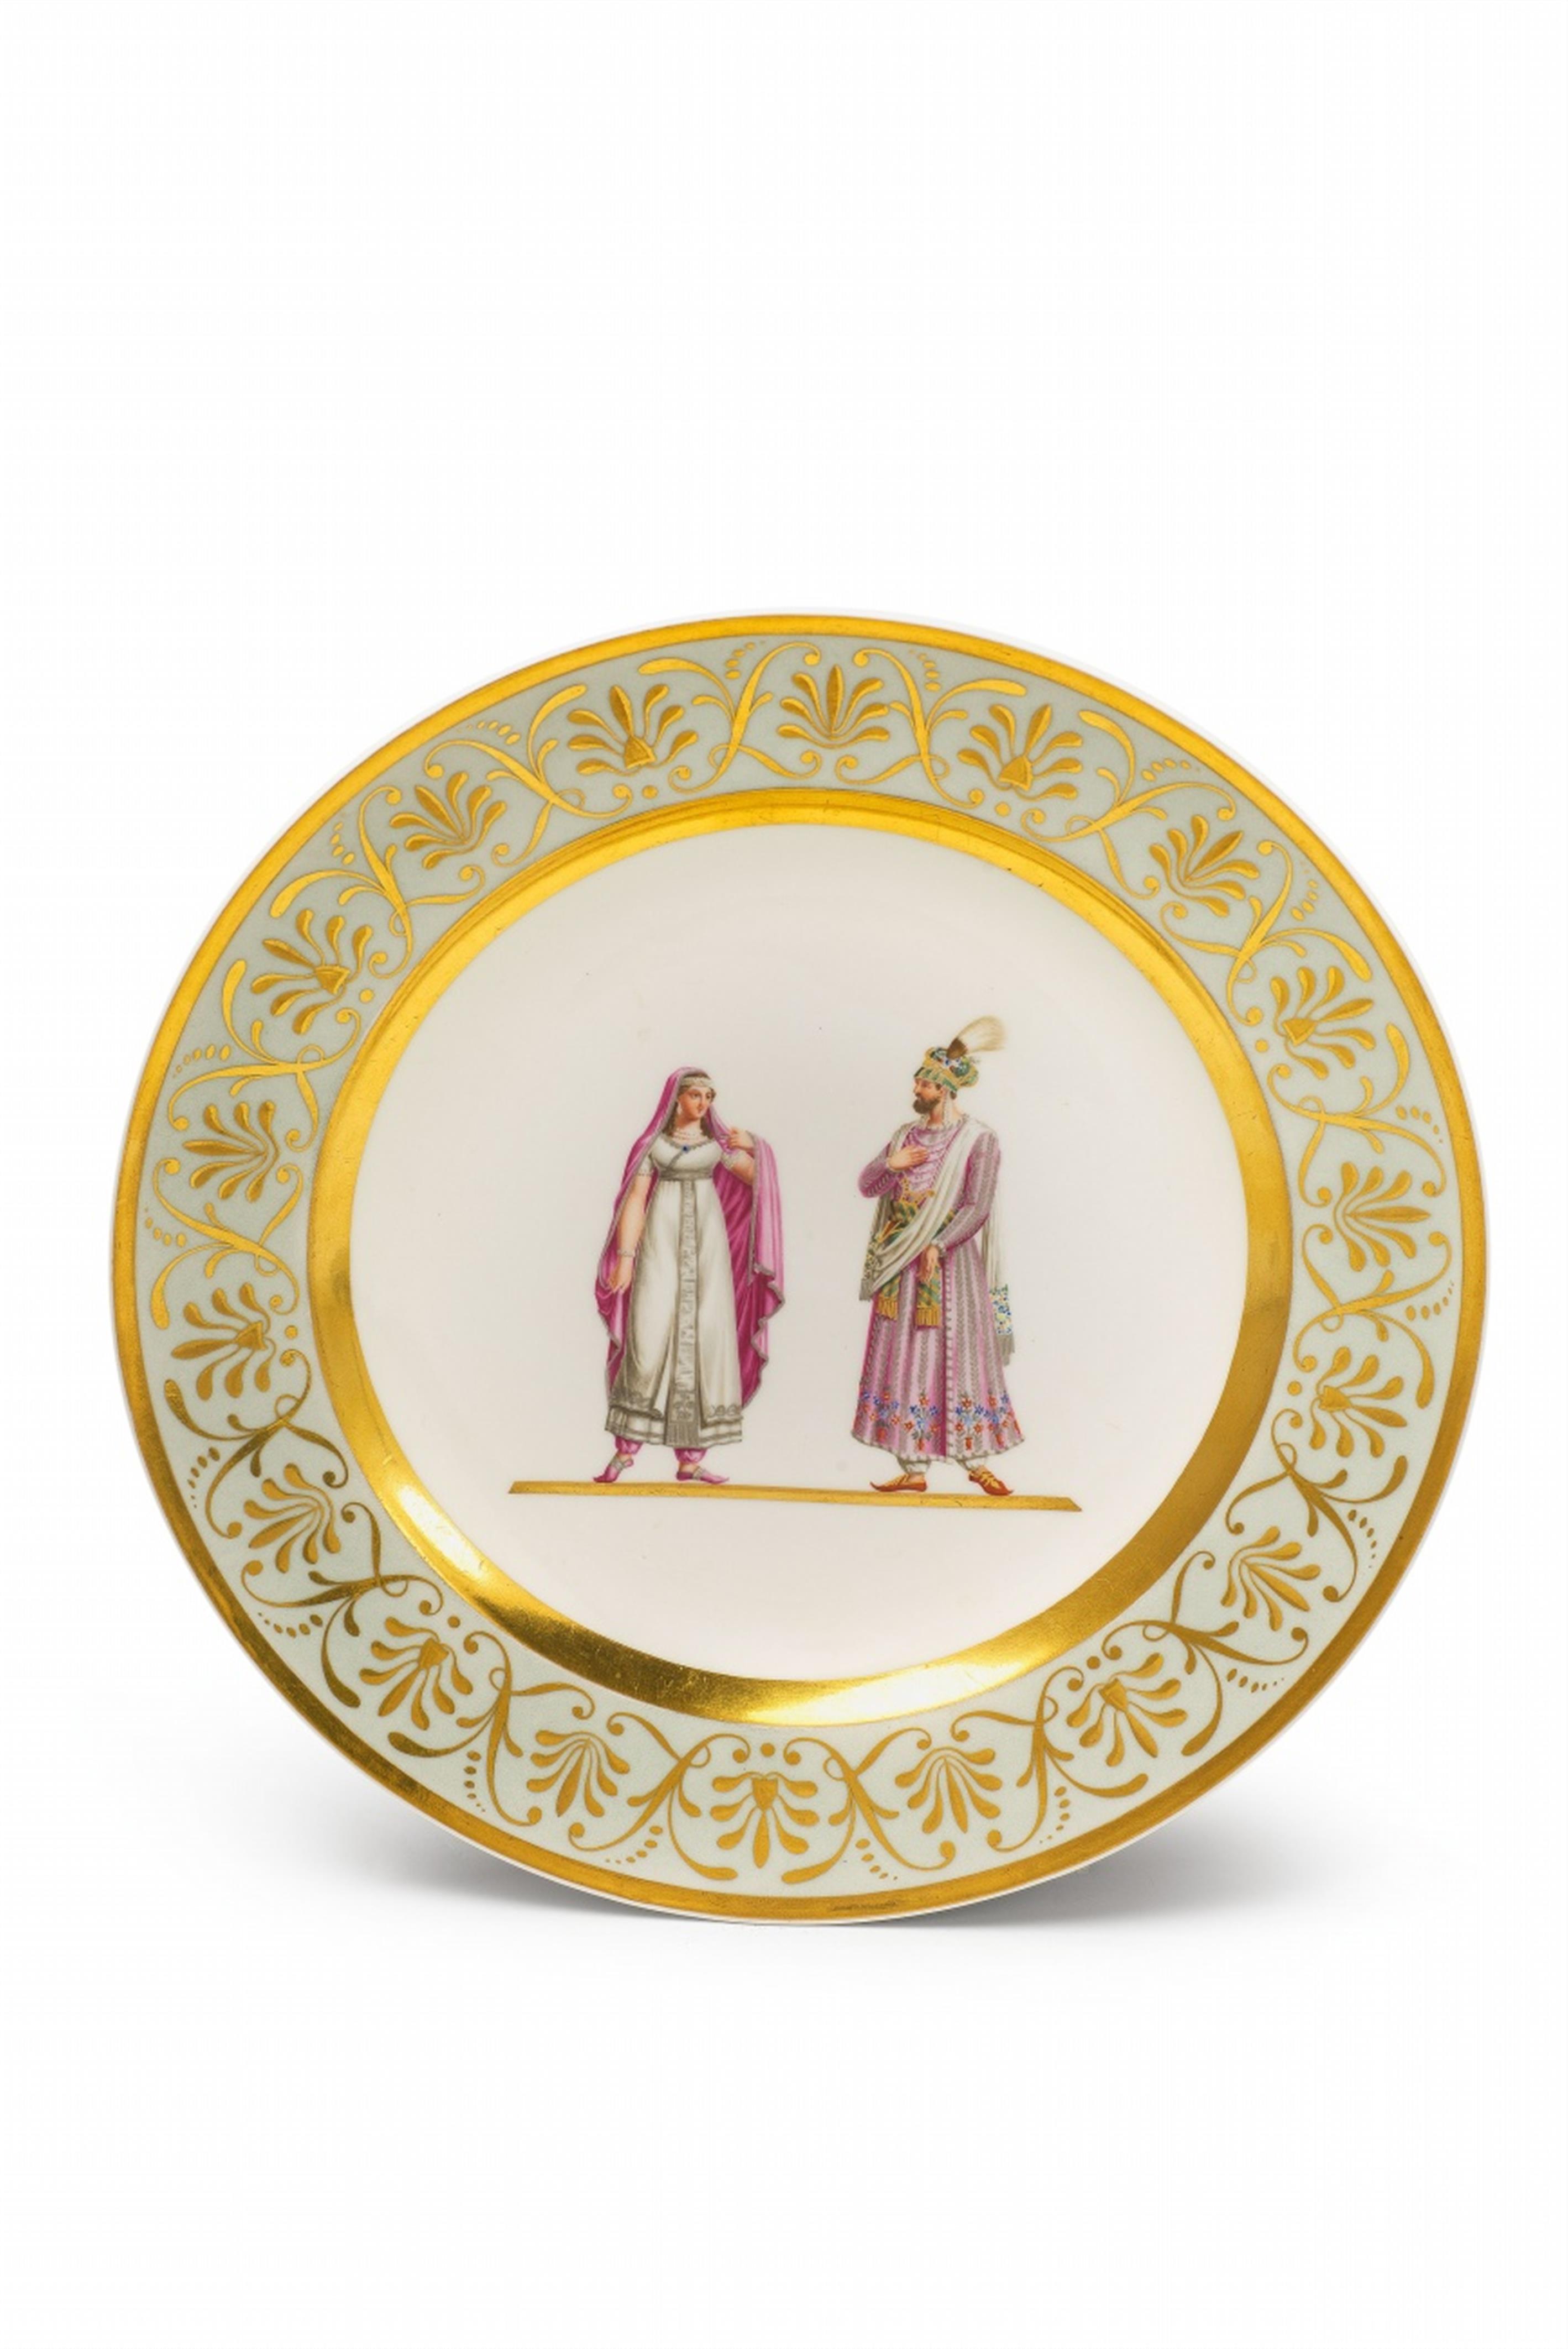 A Berlin KPM porcelain plate with a scene from Lalla Rûkh - image-1